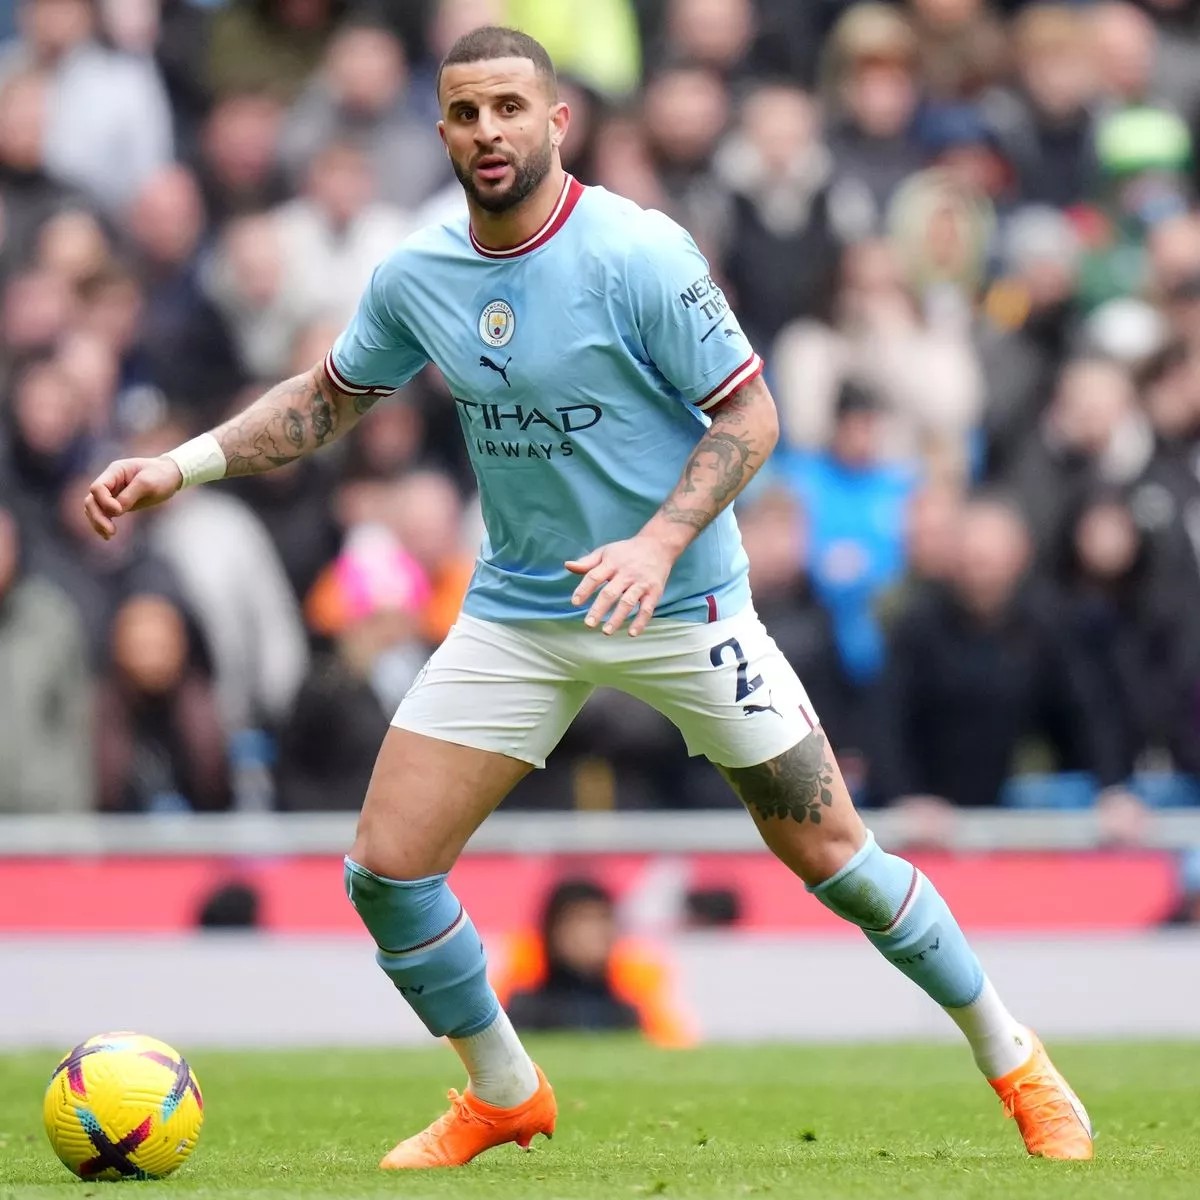 🚨Manchester City defender Kyle Walker is being closely monitored by Bayern Munich. 
🏴󠁧󠁢󠁥󠁮󠁧󠁿 🔵 #MCFC 🔴 #FCBayern